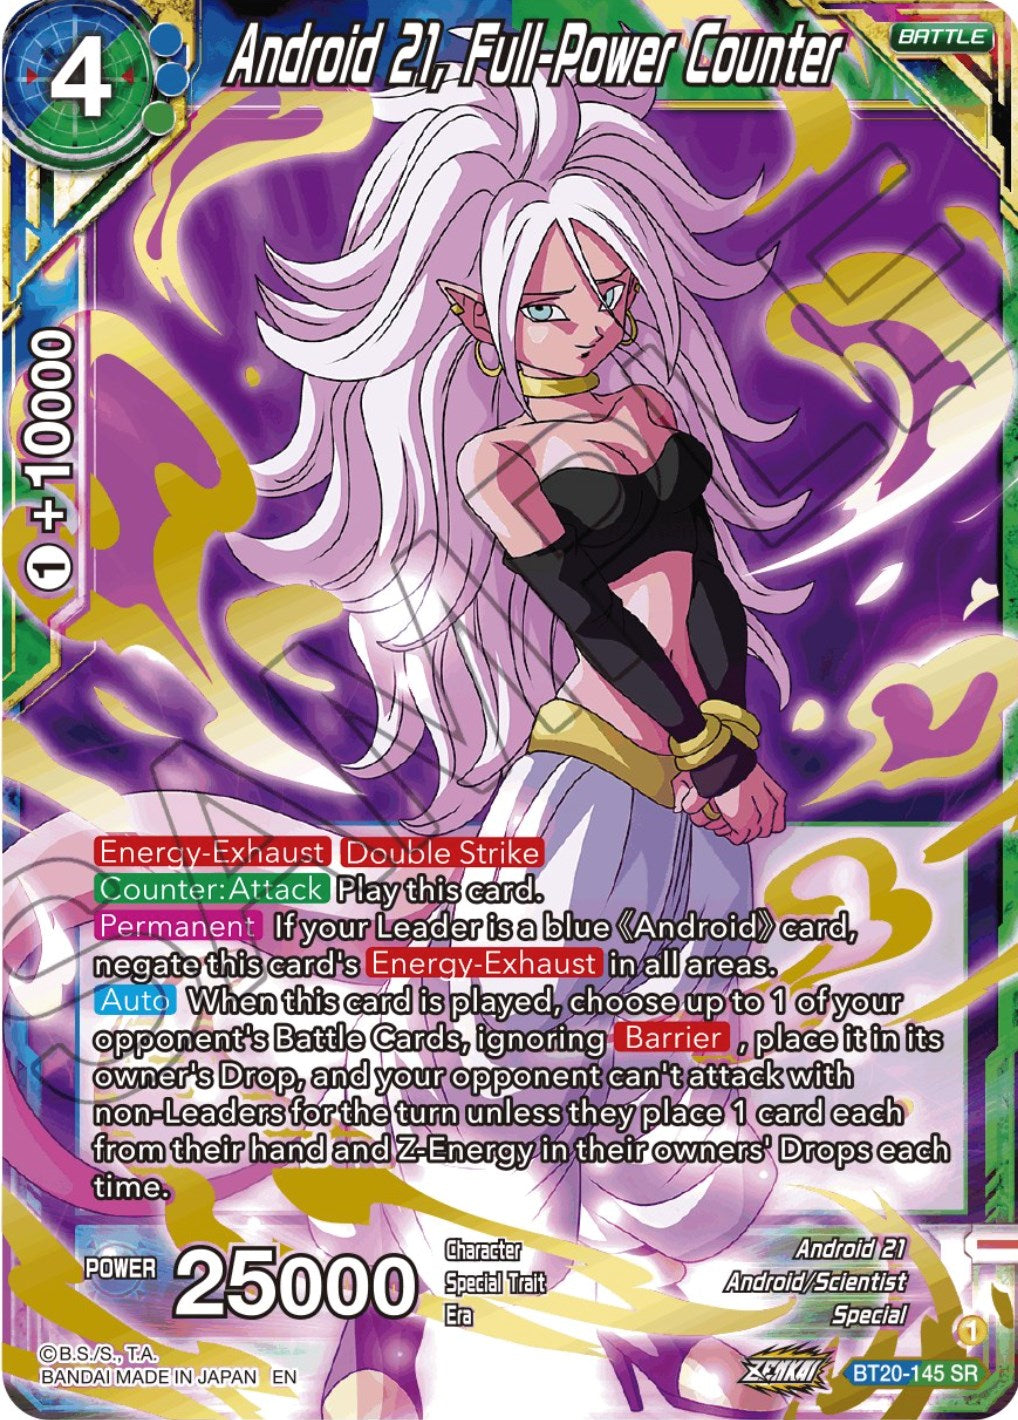 Android 21, Full-Power Counter (BT20-145) [Power Absorbed] | North Valley Games